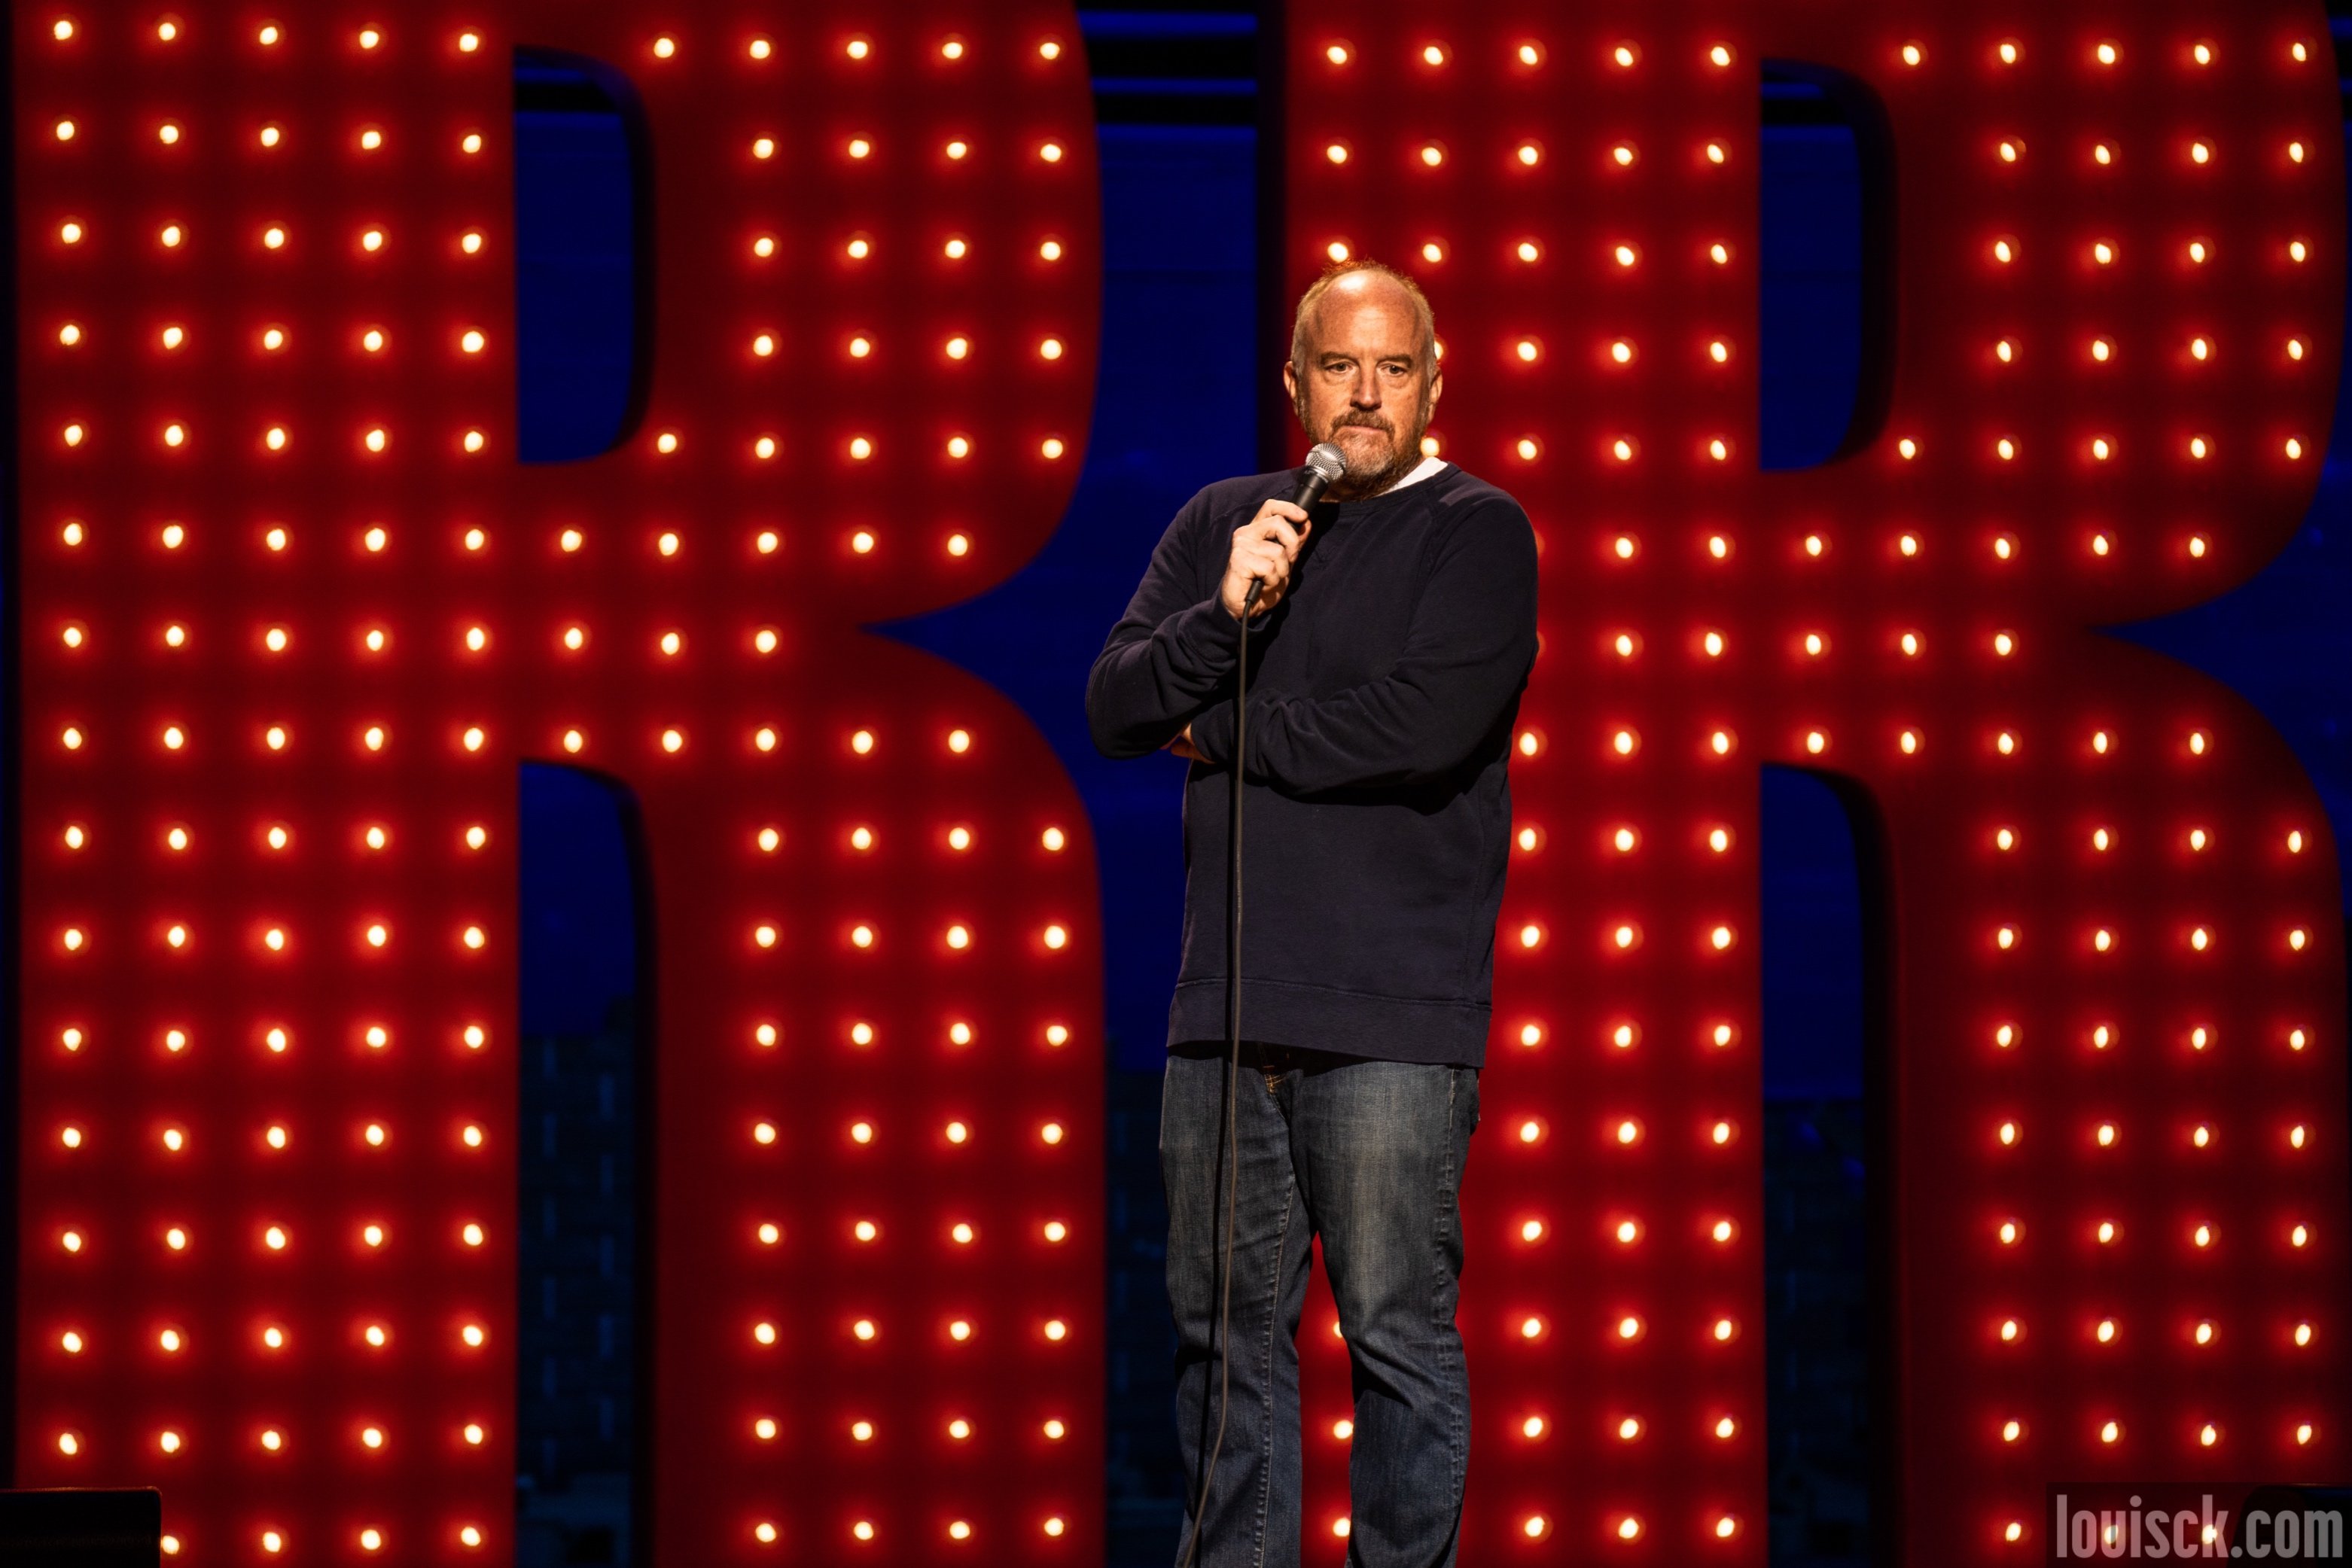 Photo 4 in 'LOUIS C.K. at MADISON SQUARE GARDEN' gallery showcasing lighting design by Mike Baldassari of Mike-O-Matic Industries LLC